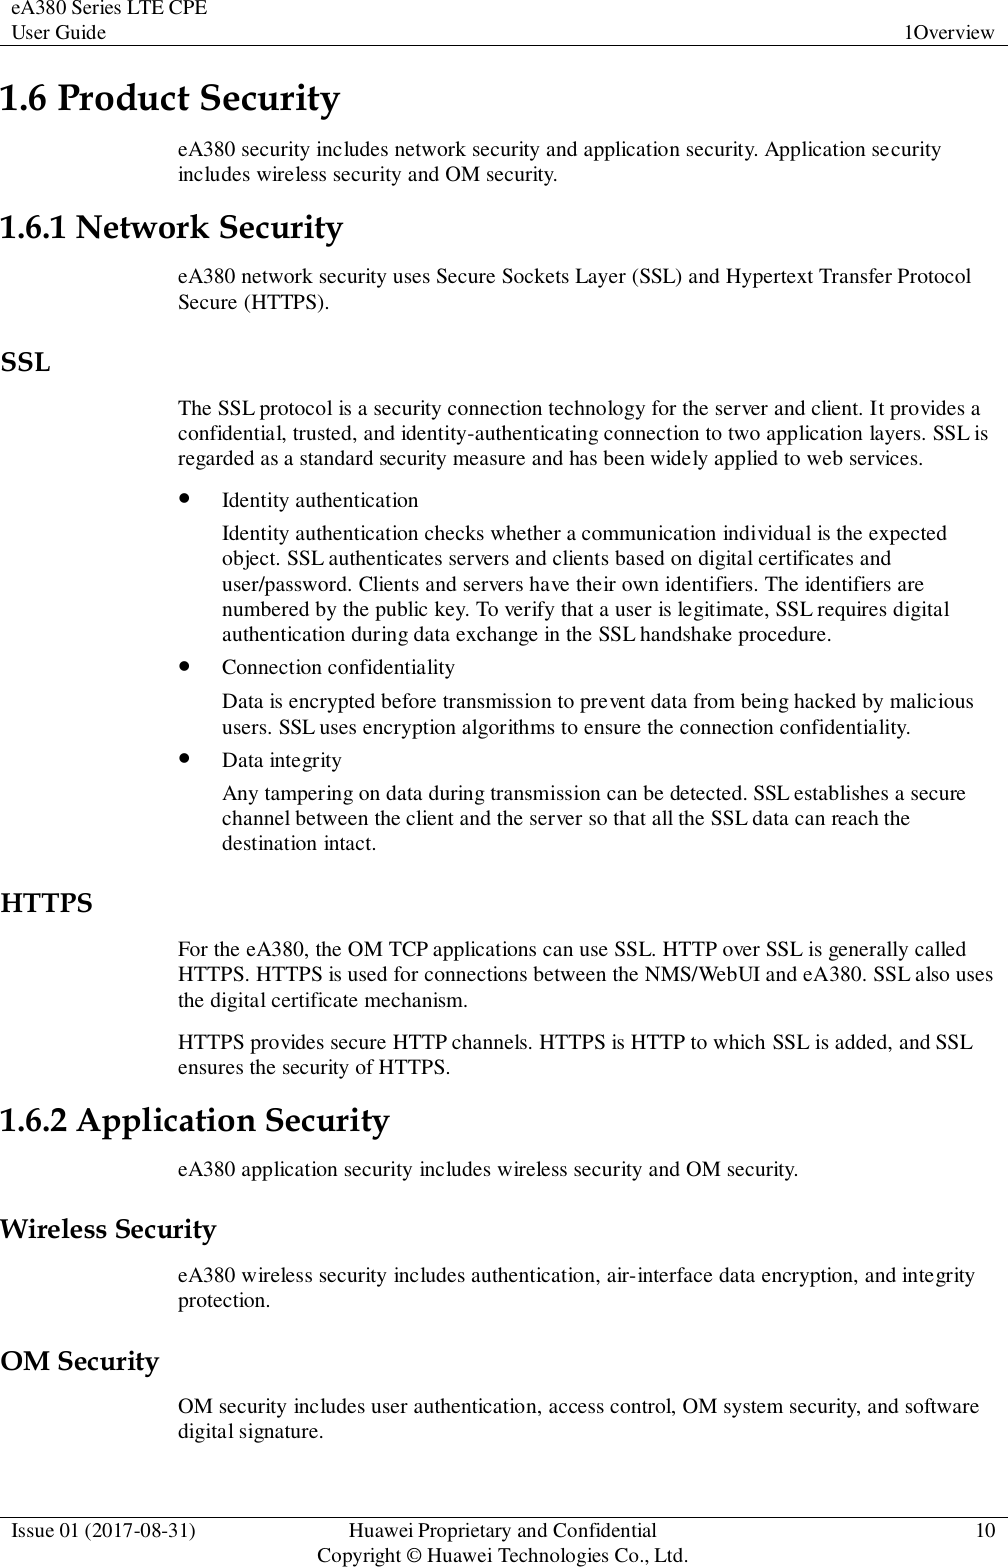 eA380 Series LTE CPE User Guide 1Overview  Issue 01 (2017-08-31) Huawei Proprietary and Confidential                                     Copyright © Huawei Technologies Co., Ltd. 10  1.6 Product Security eA380 security includes network security and application security. Application security includes wireless security and OM security. 1.6.1 Network Security eA380 network security uses Secure Sockets Layer (SSL) and Hypertext Transfer Protocol Secure (HTTPS). SSL The SSL protocol is a security connection technology for the server and client. It provides a confidential, trusted, and identity-authenticating connection to two application layers. SSL is regarded as a standard security measure and has been widely applied to web services.  Identity authentication Identity authentication checks whether a communication individual is the expected object. SSL authenticates servers and clients based on digital certificates and user/password. Clients and servers have their own identifiers. The identifiers are numbered by the public key. To verify that a user is legitimate, SSL requires digital authentication during data exchange in the SSL handshake procedure.  Connection confidentiality Data is encrypted before transmission to prevent data from being hacked by malicious users. SSL uses encryption algorithms to ensure the connection confidentiality.  Data integrity Any tampering on data during transmission can be detected. SSL establishes a secure channel between the client and the server so that all the SSL data can reach the destination intact. HTTPS For the eA380, the OM TCP applications can use SSL. HTTP over SSL is generally called HTTPS. HTTPS is used for connections between the NMS/WebUI and eA380. SSL also uses the digital certificate mechanism. HTTPS provides secure HTTP channels. HTTPS is HTTP to which SSL is added, and SSL ensures the security of HTTPS. 1.6.2 Application Security eA380 application security includes wireless security and OM security. Wireless Security eA380 wireless security includes authentication, air-interface data encryption, and integrity protection. OM Security OM security includes user authentication, access control, OM system security, and software digital signature. 